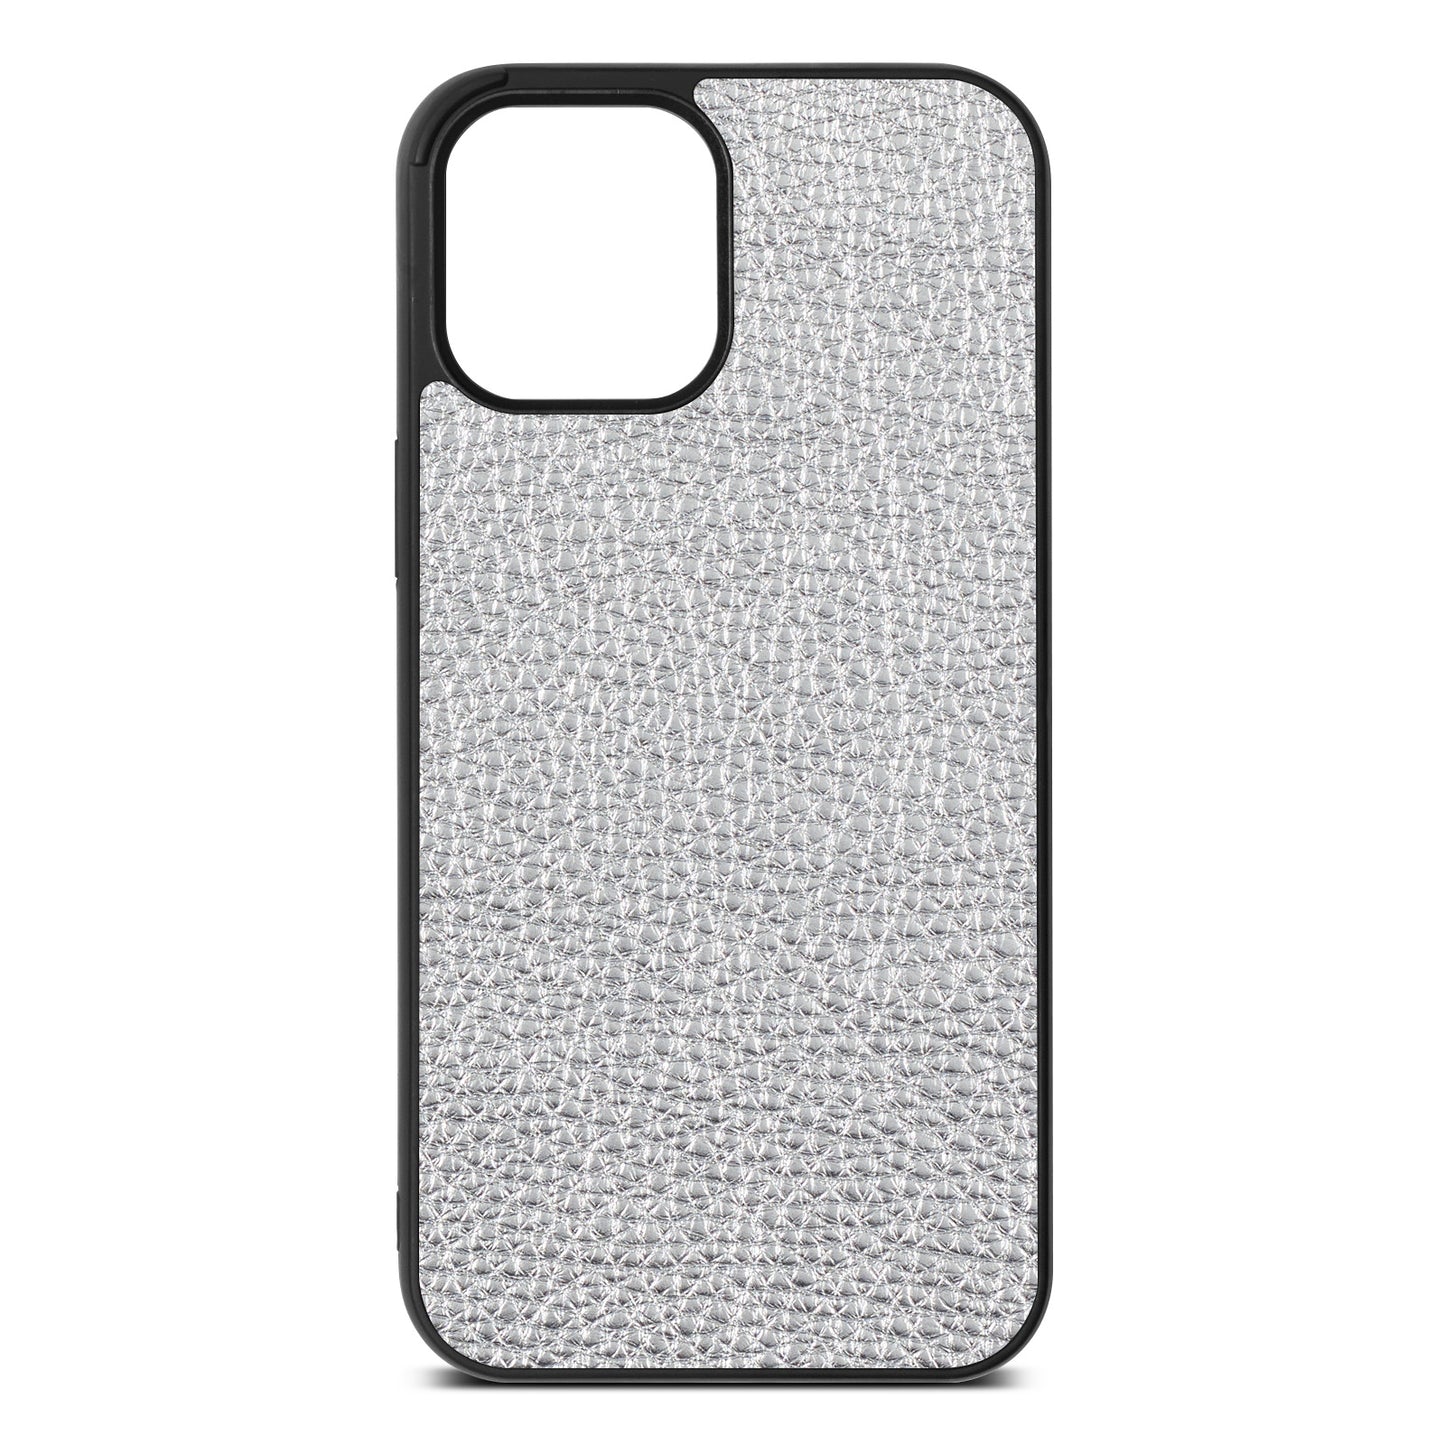 Blank iPhone 12 Pro Max Silver Pebble Leather Case